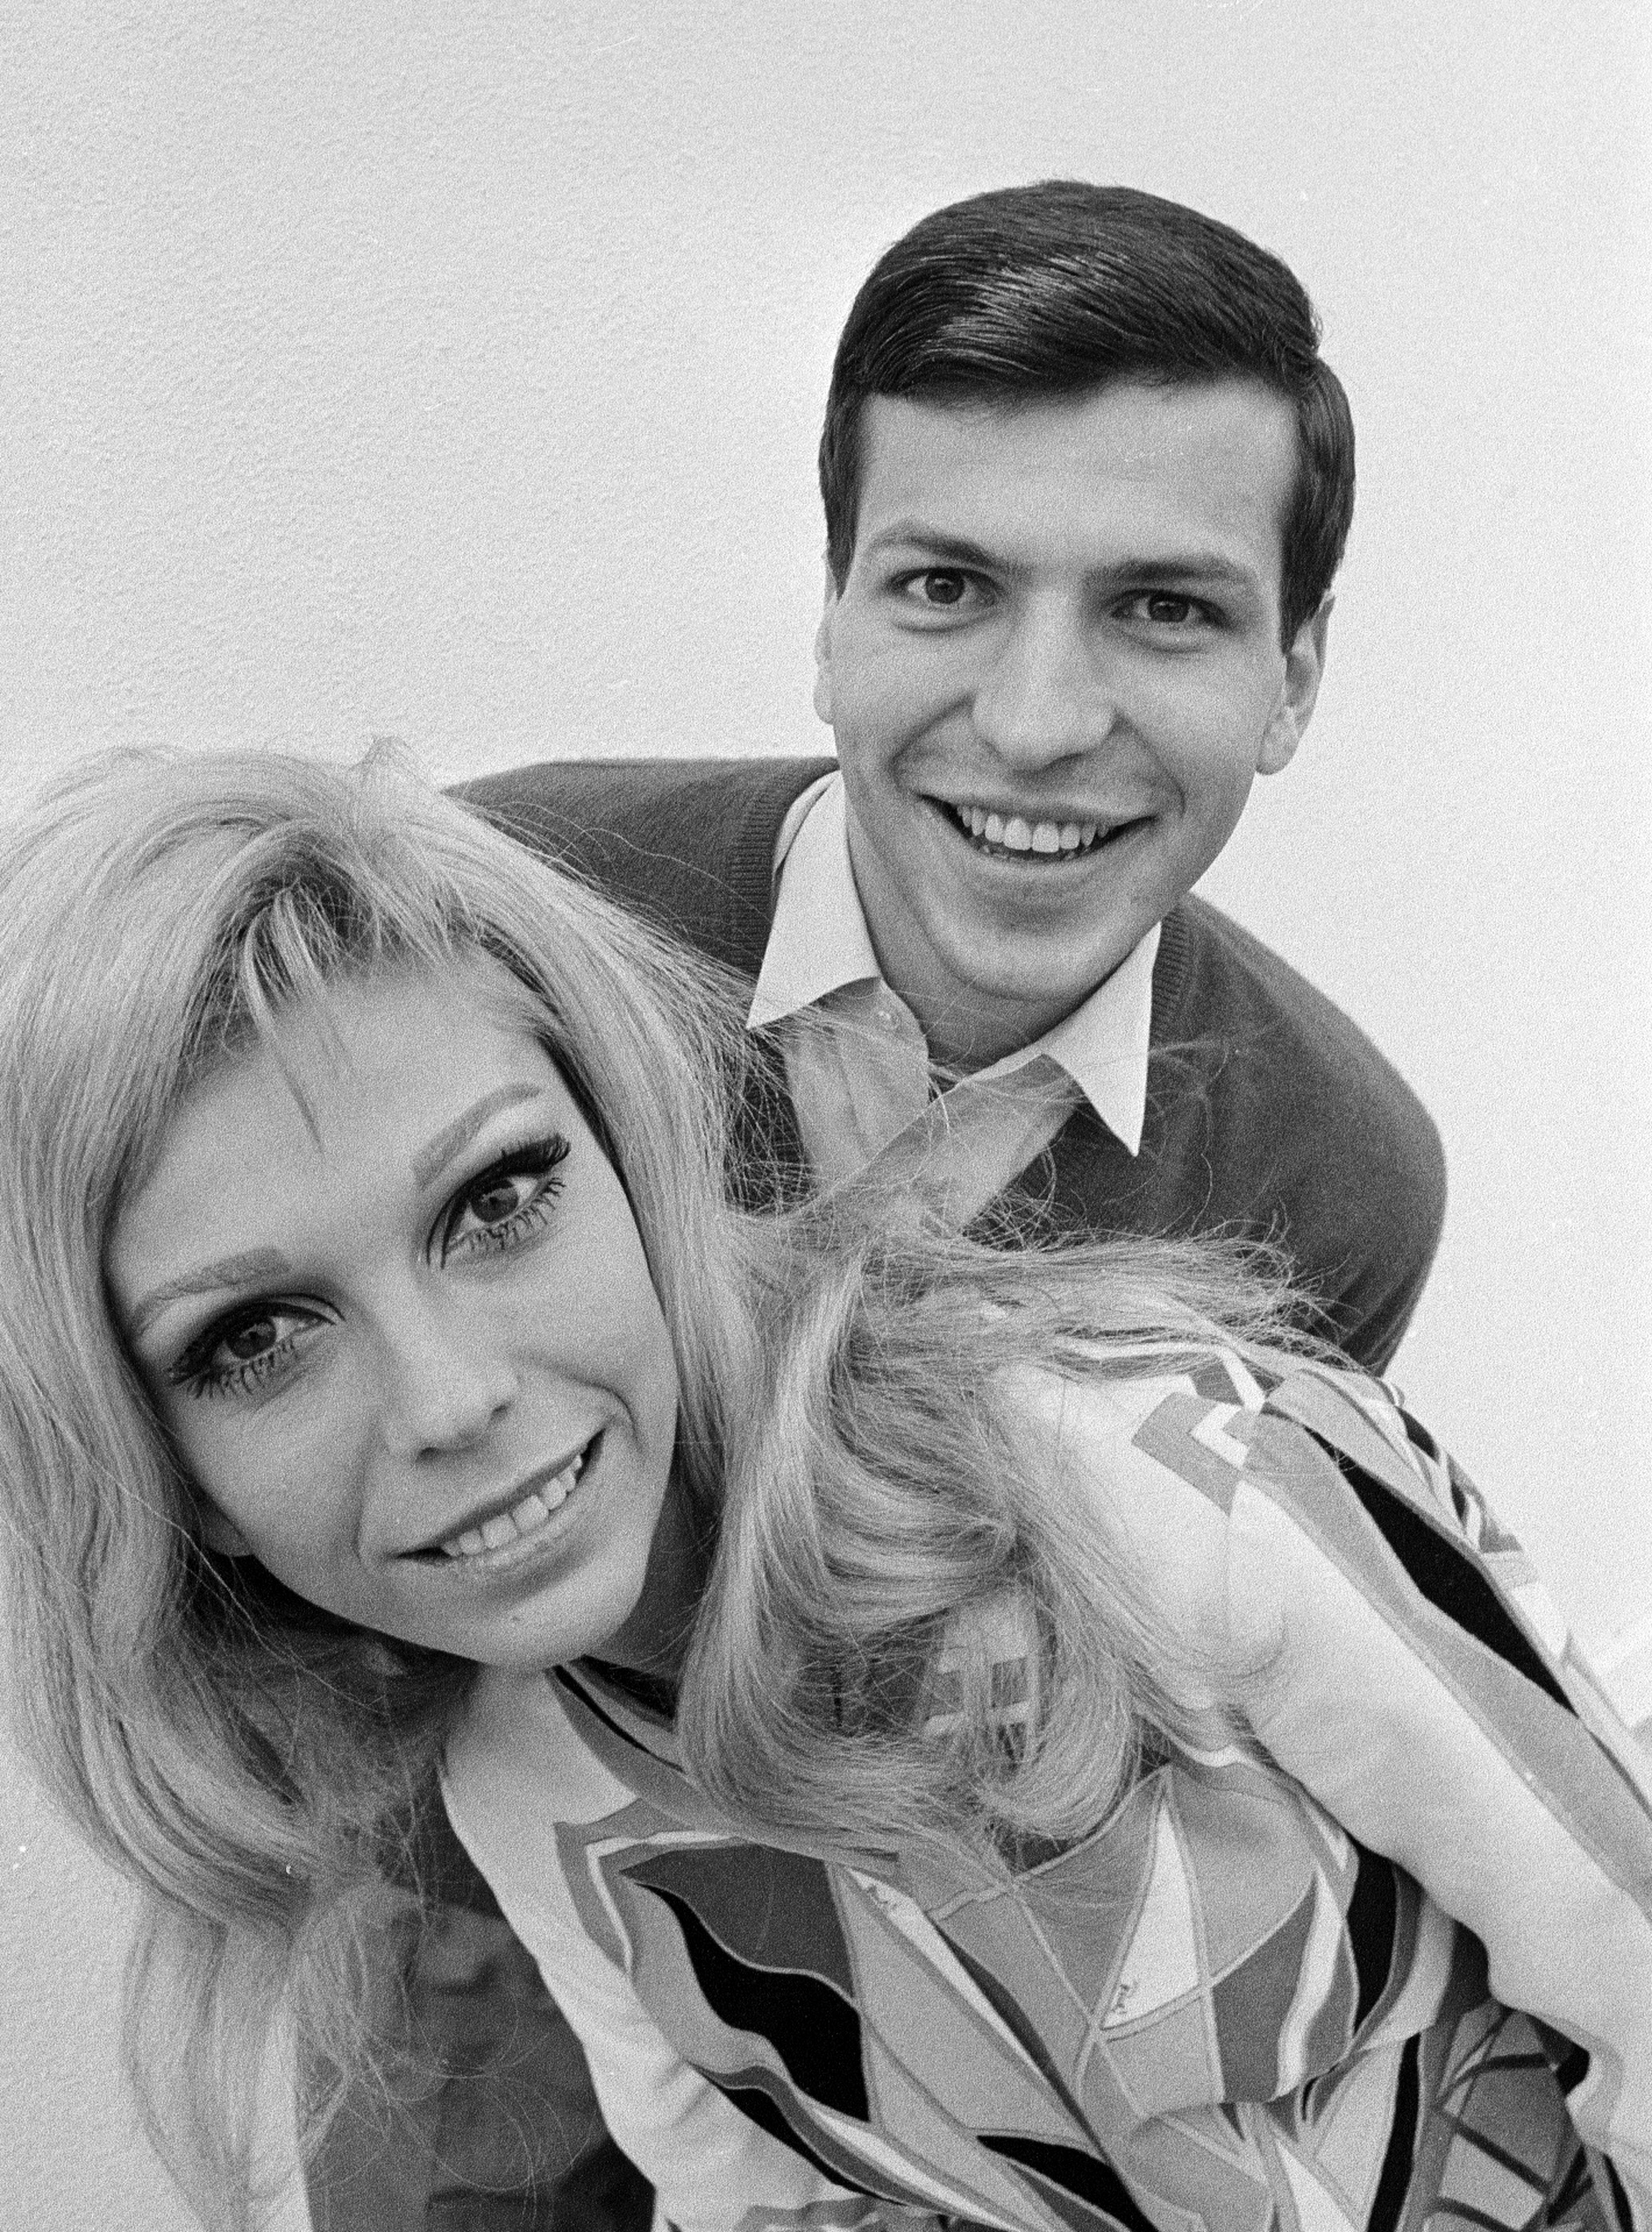 Nancy and Frank Sinatra, Jr. on "THE SMOTHERS BROTHERS COMEDY HOUR" on February 9, 1968. | Source: Getty Images